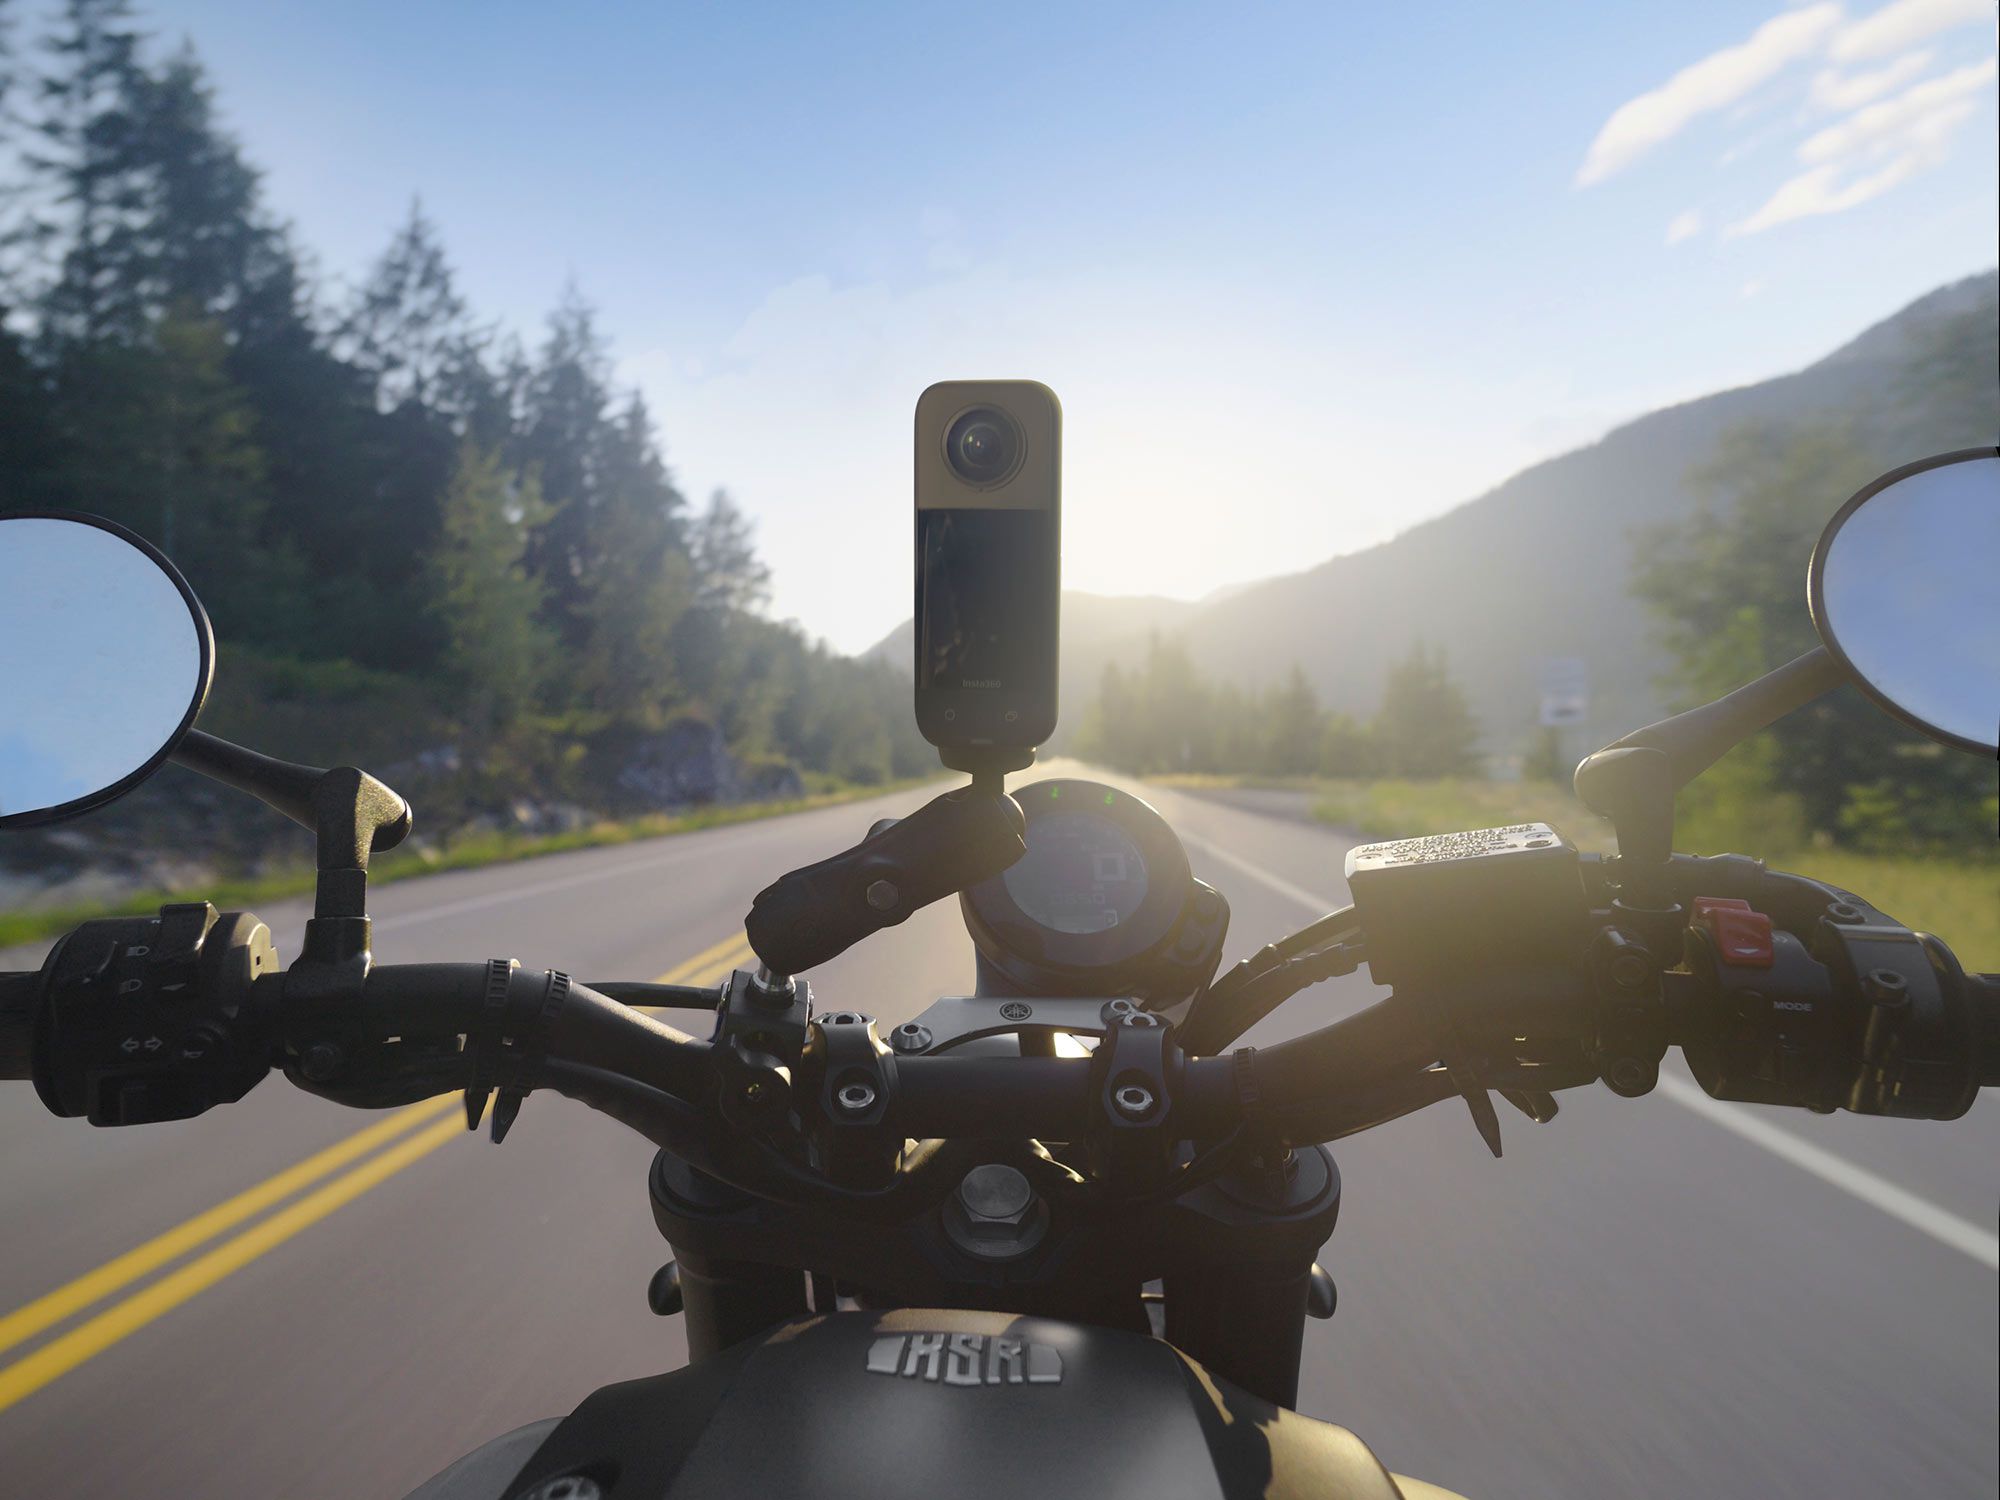 A new sensor and improved features give riders more creative options than ever.